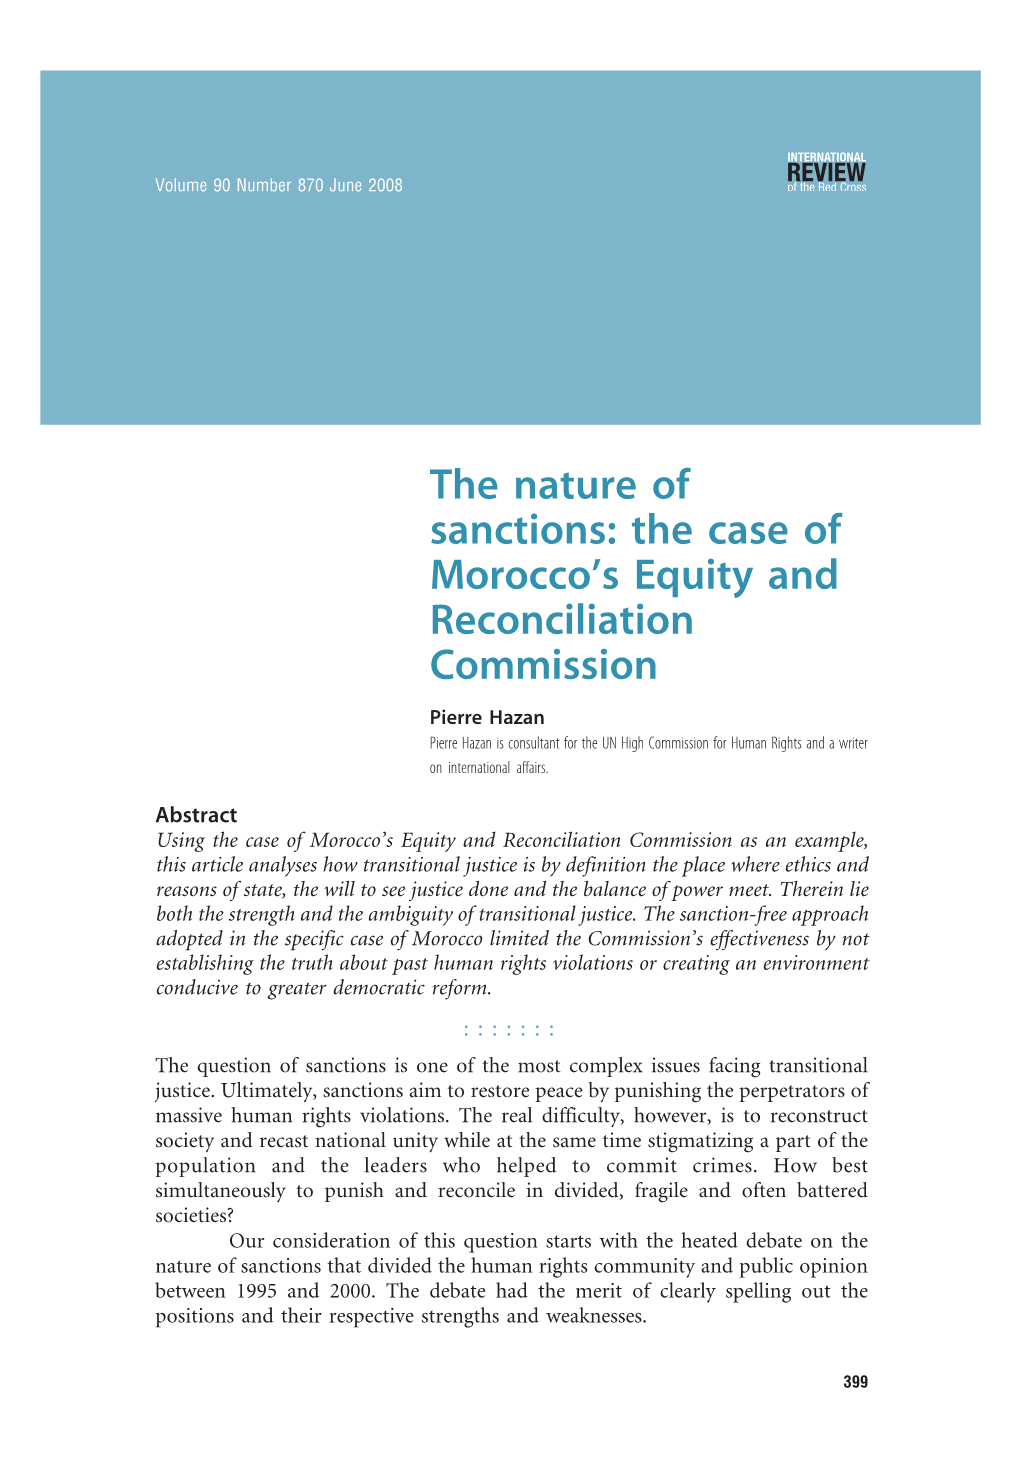 The Case of Morocco's Equity and Reconciliation Commission